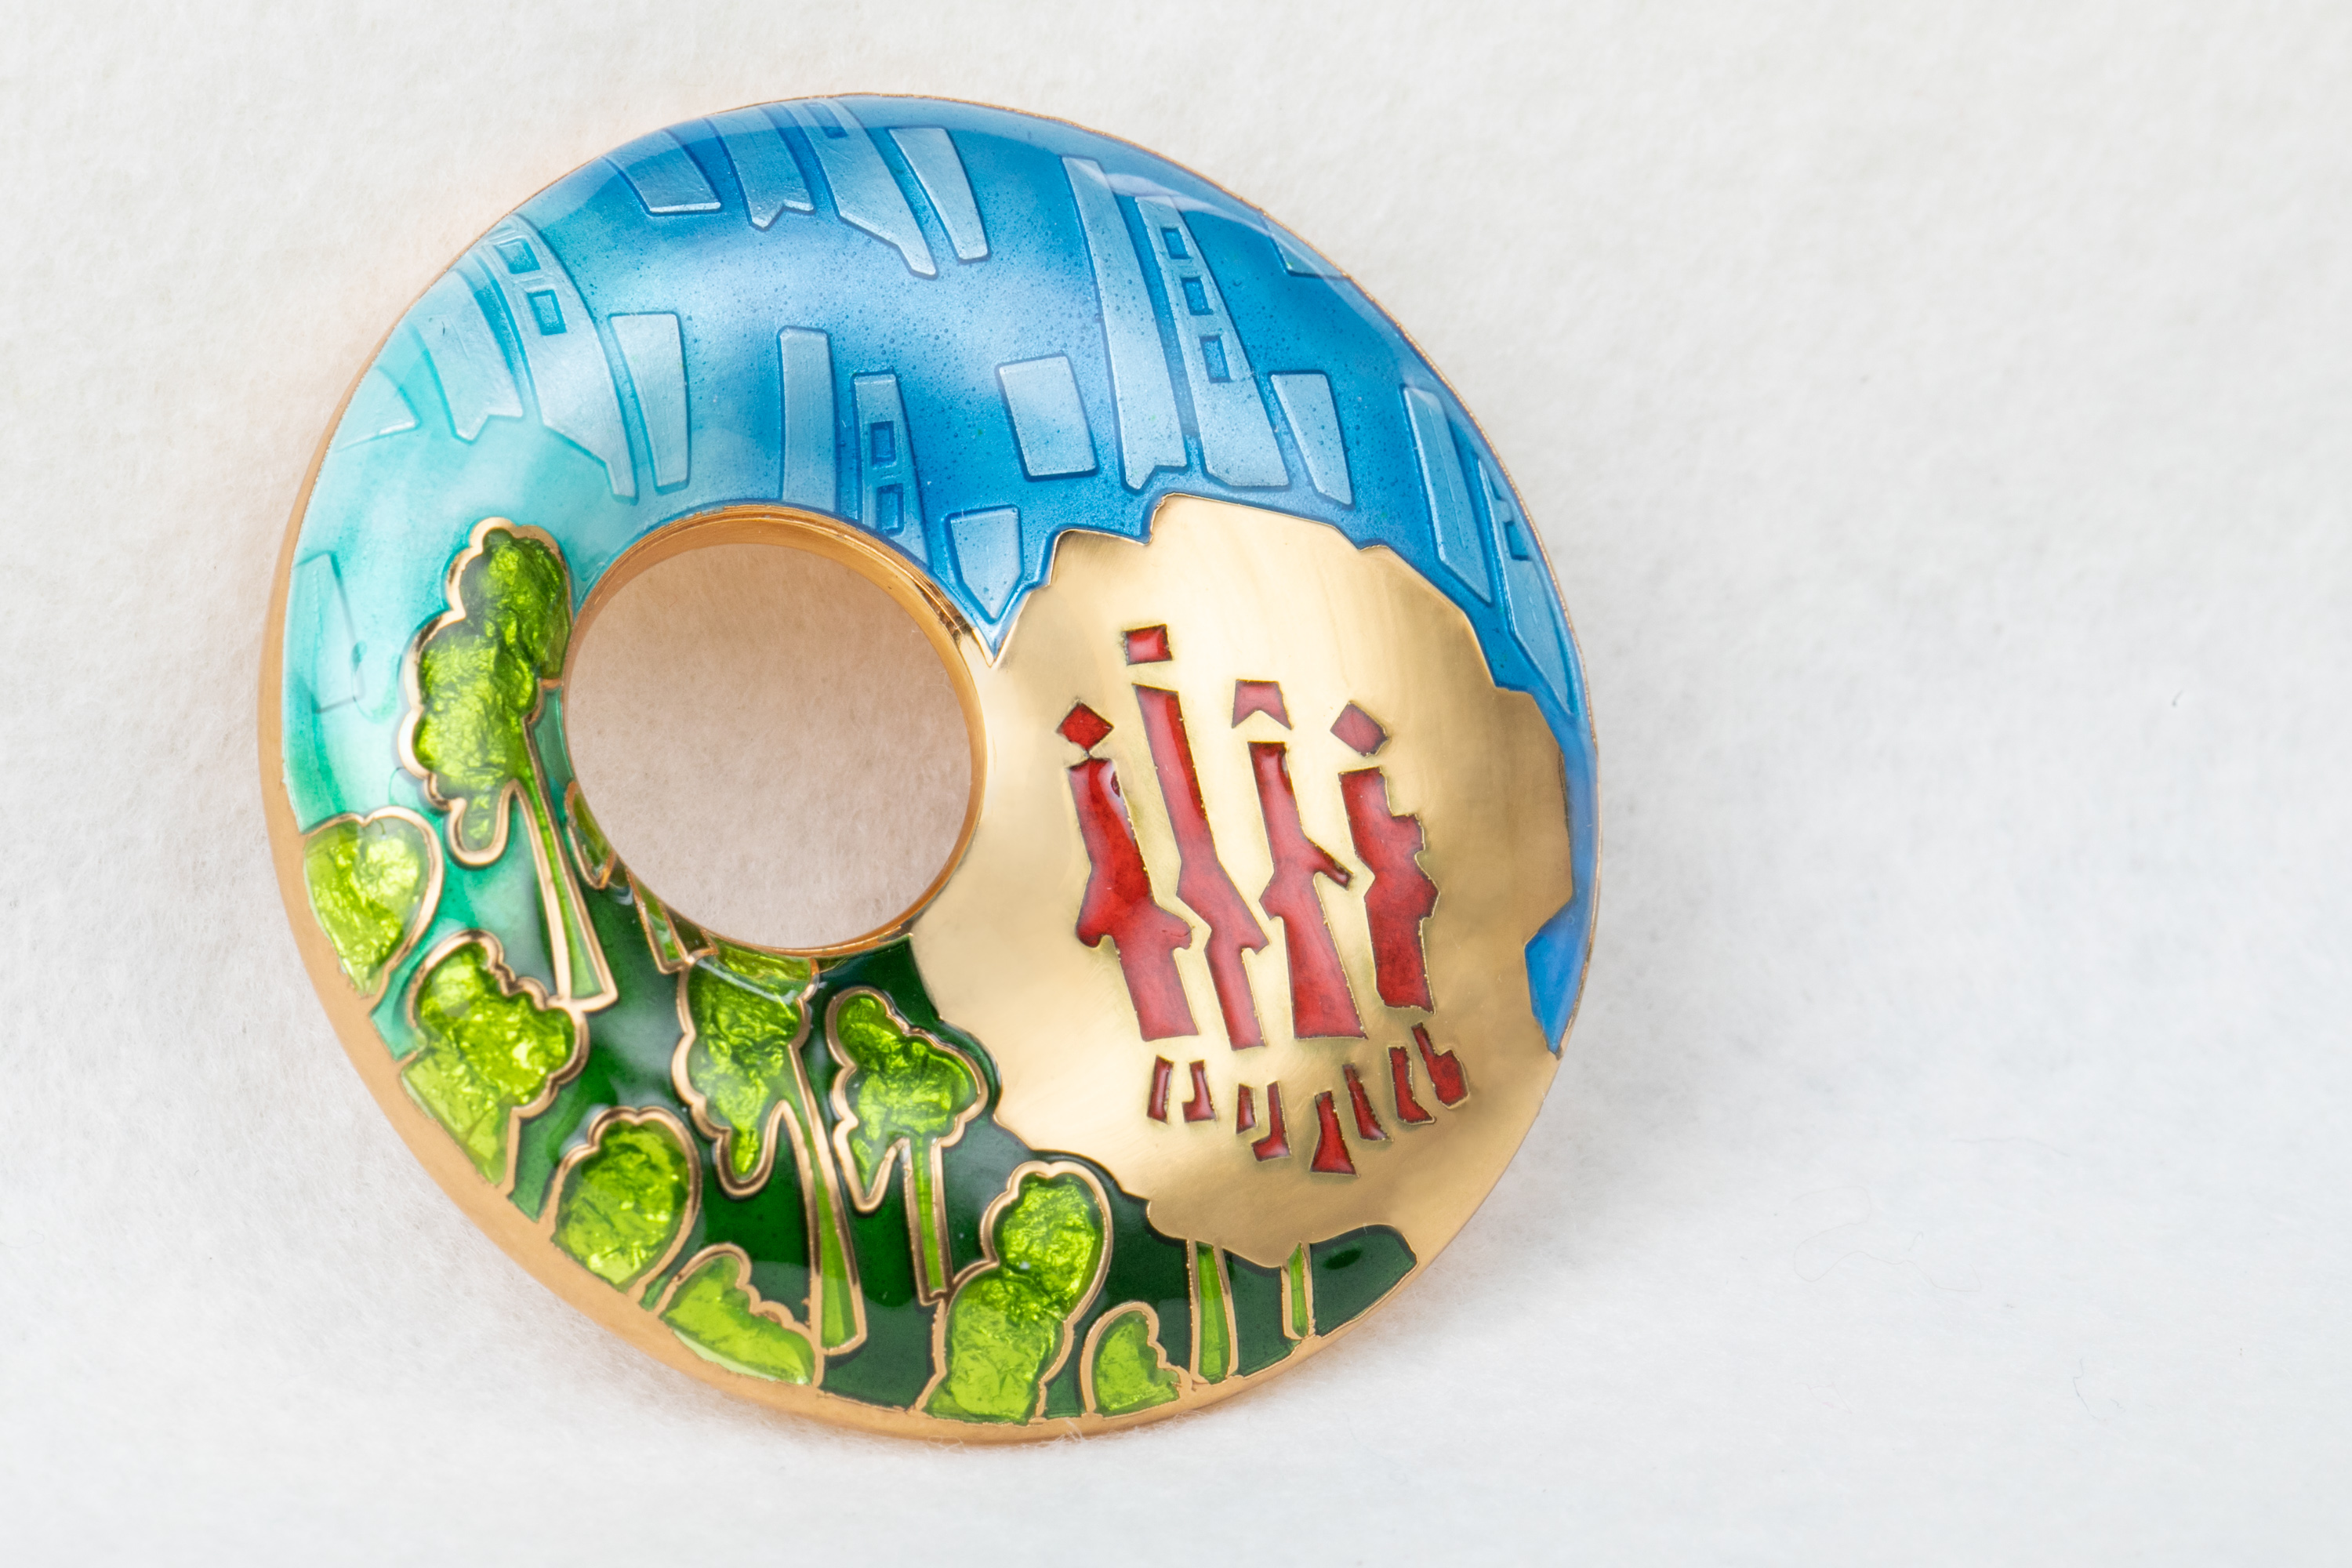 A round gold brooch with design of people, trees and buildings.